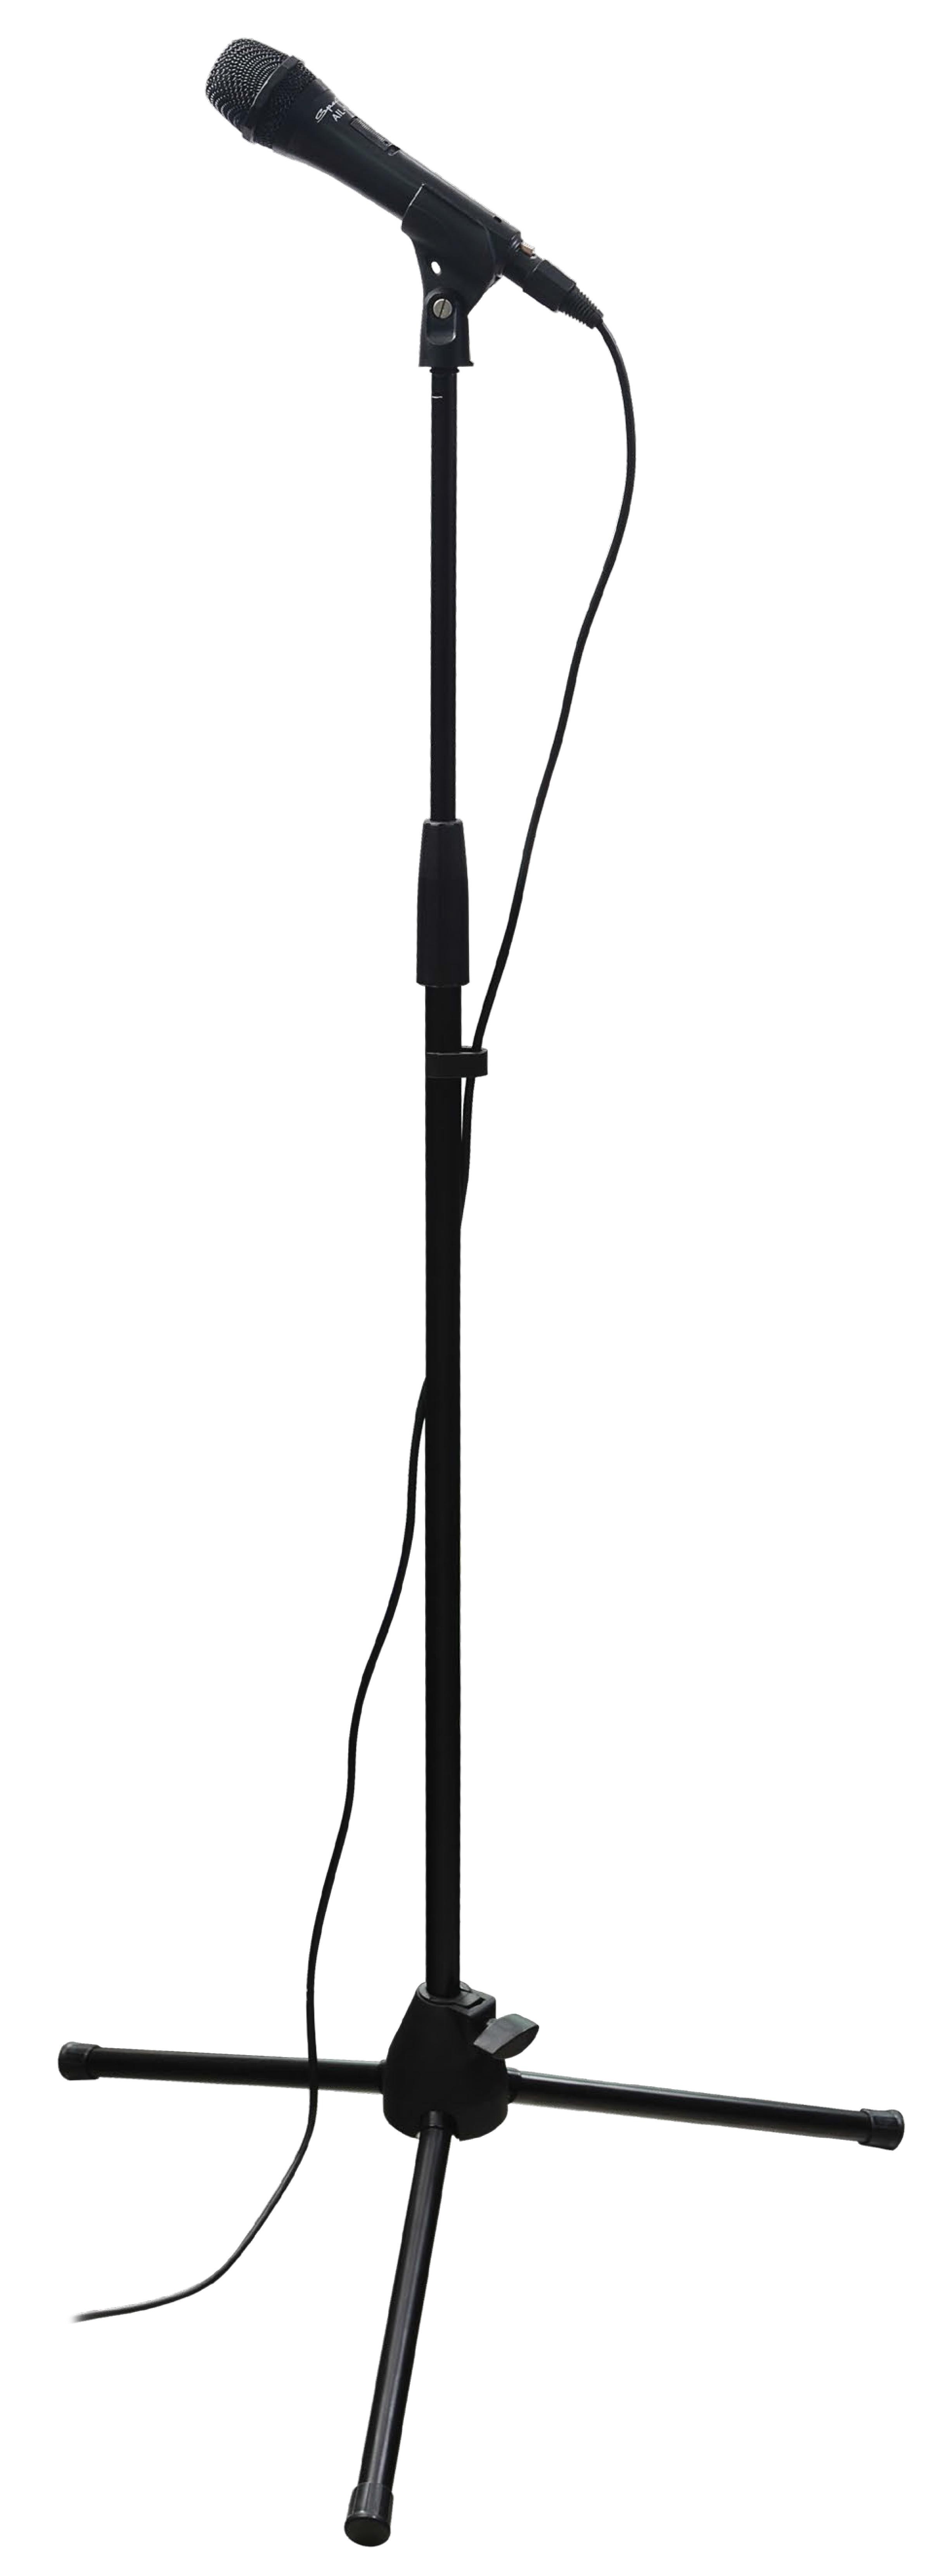 Microphone stand clipart.